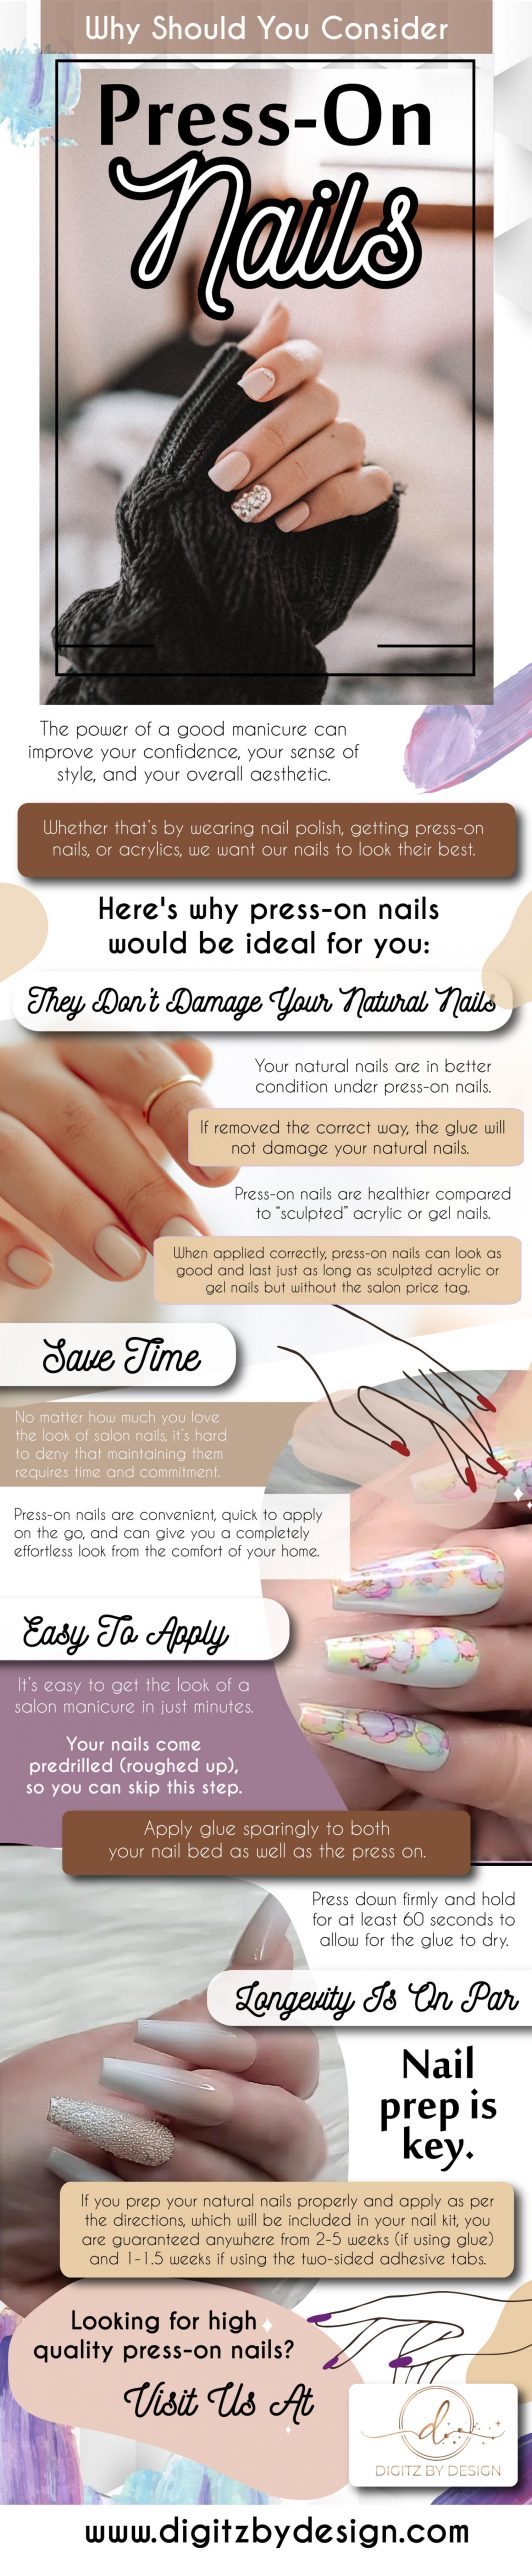 Why Should You Consider Press-On Nails